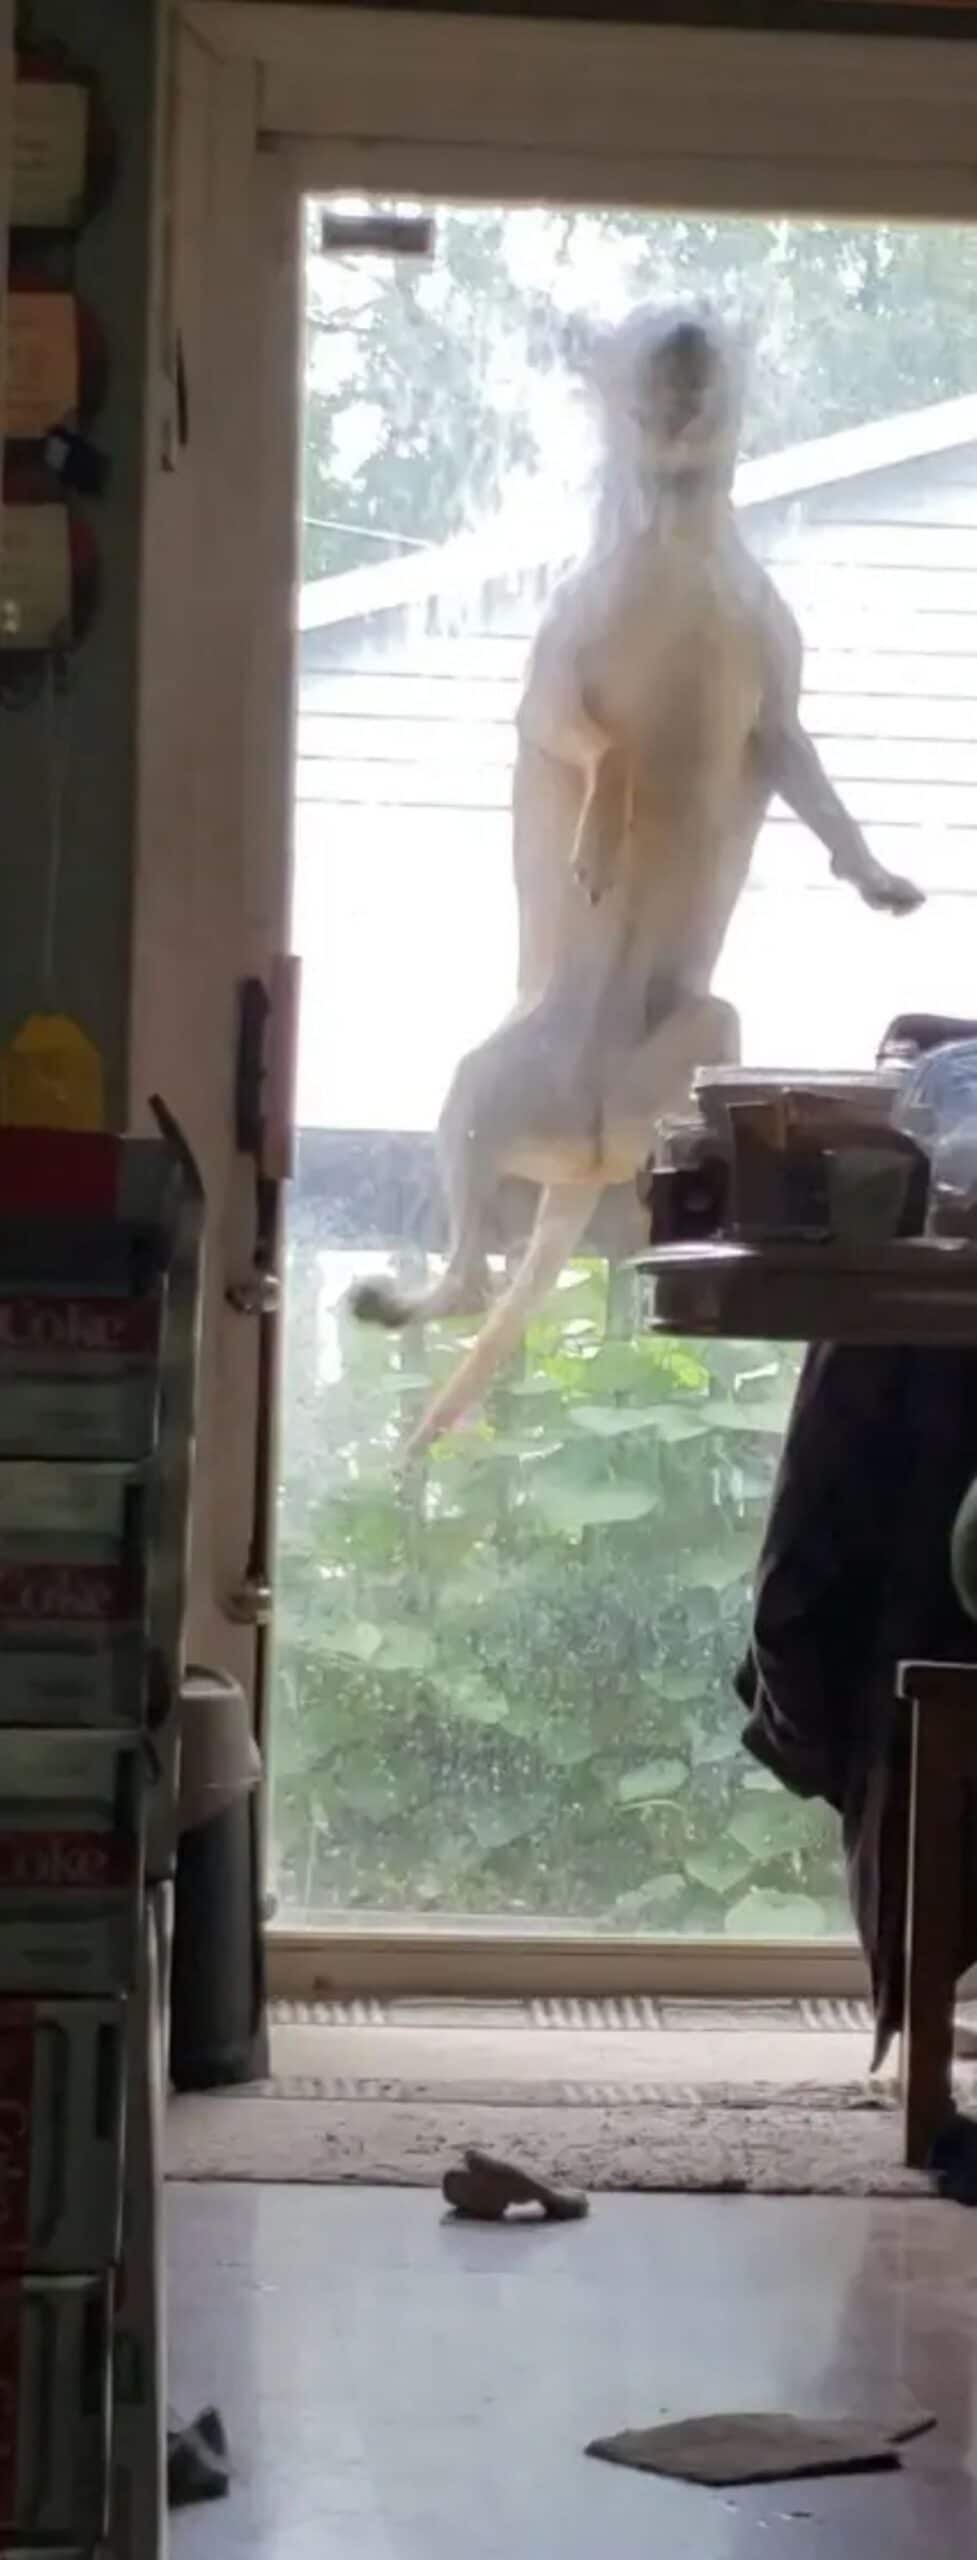 white dog outside a glass door caught mid-jump